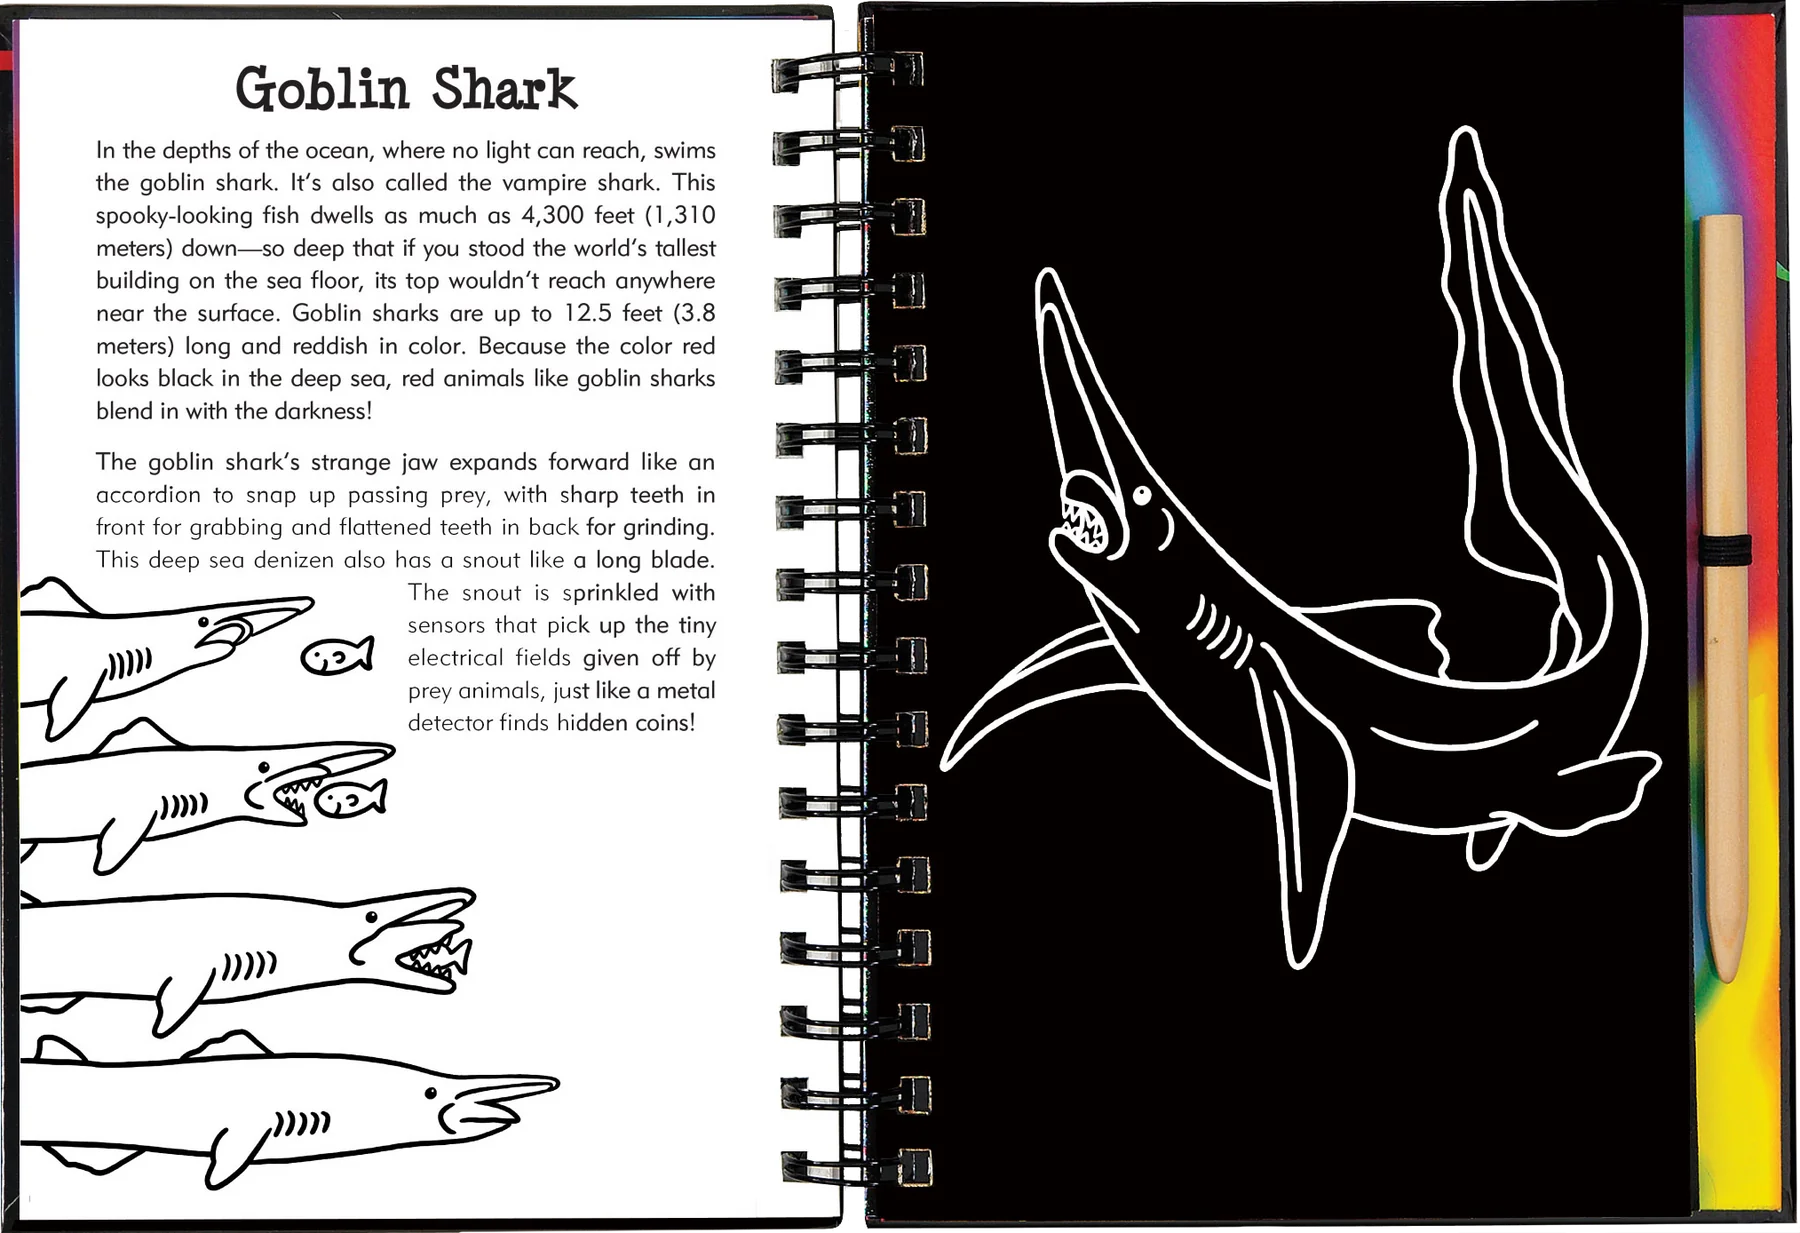 Sharks Scratch and Sketch